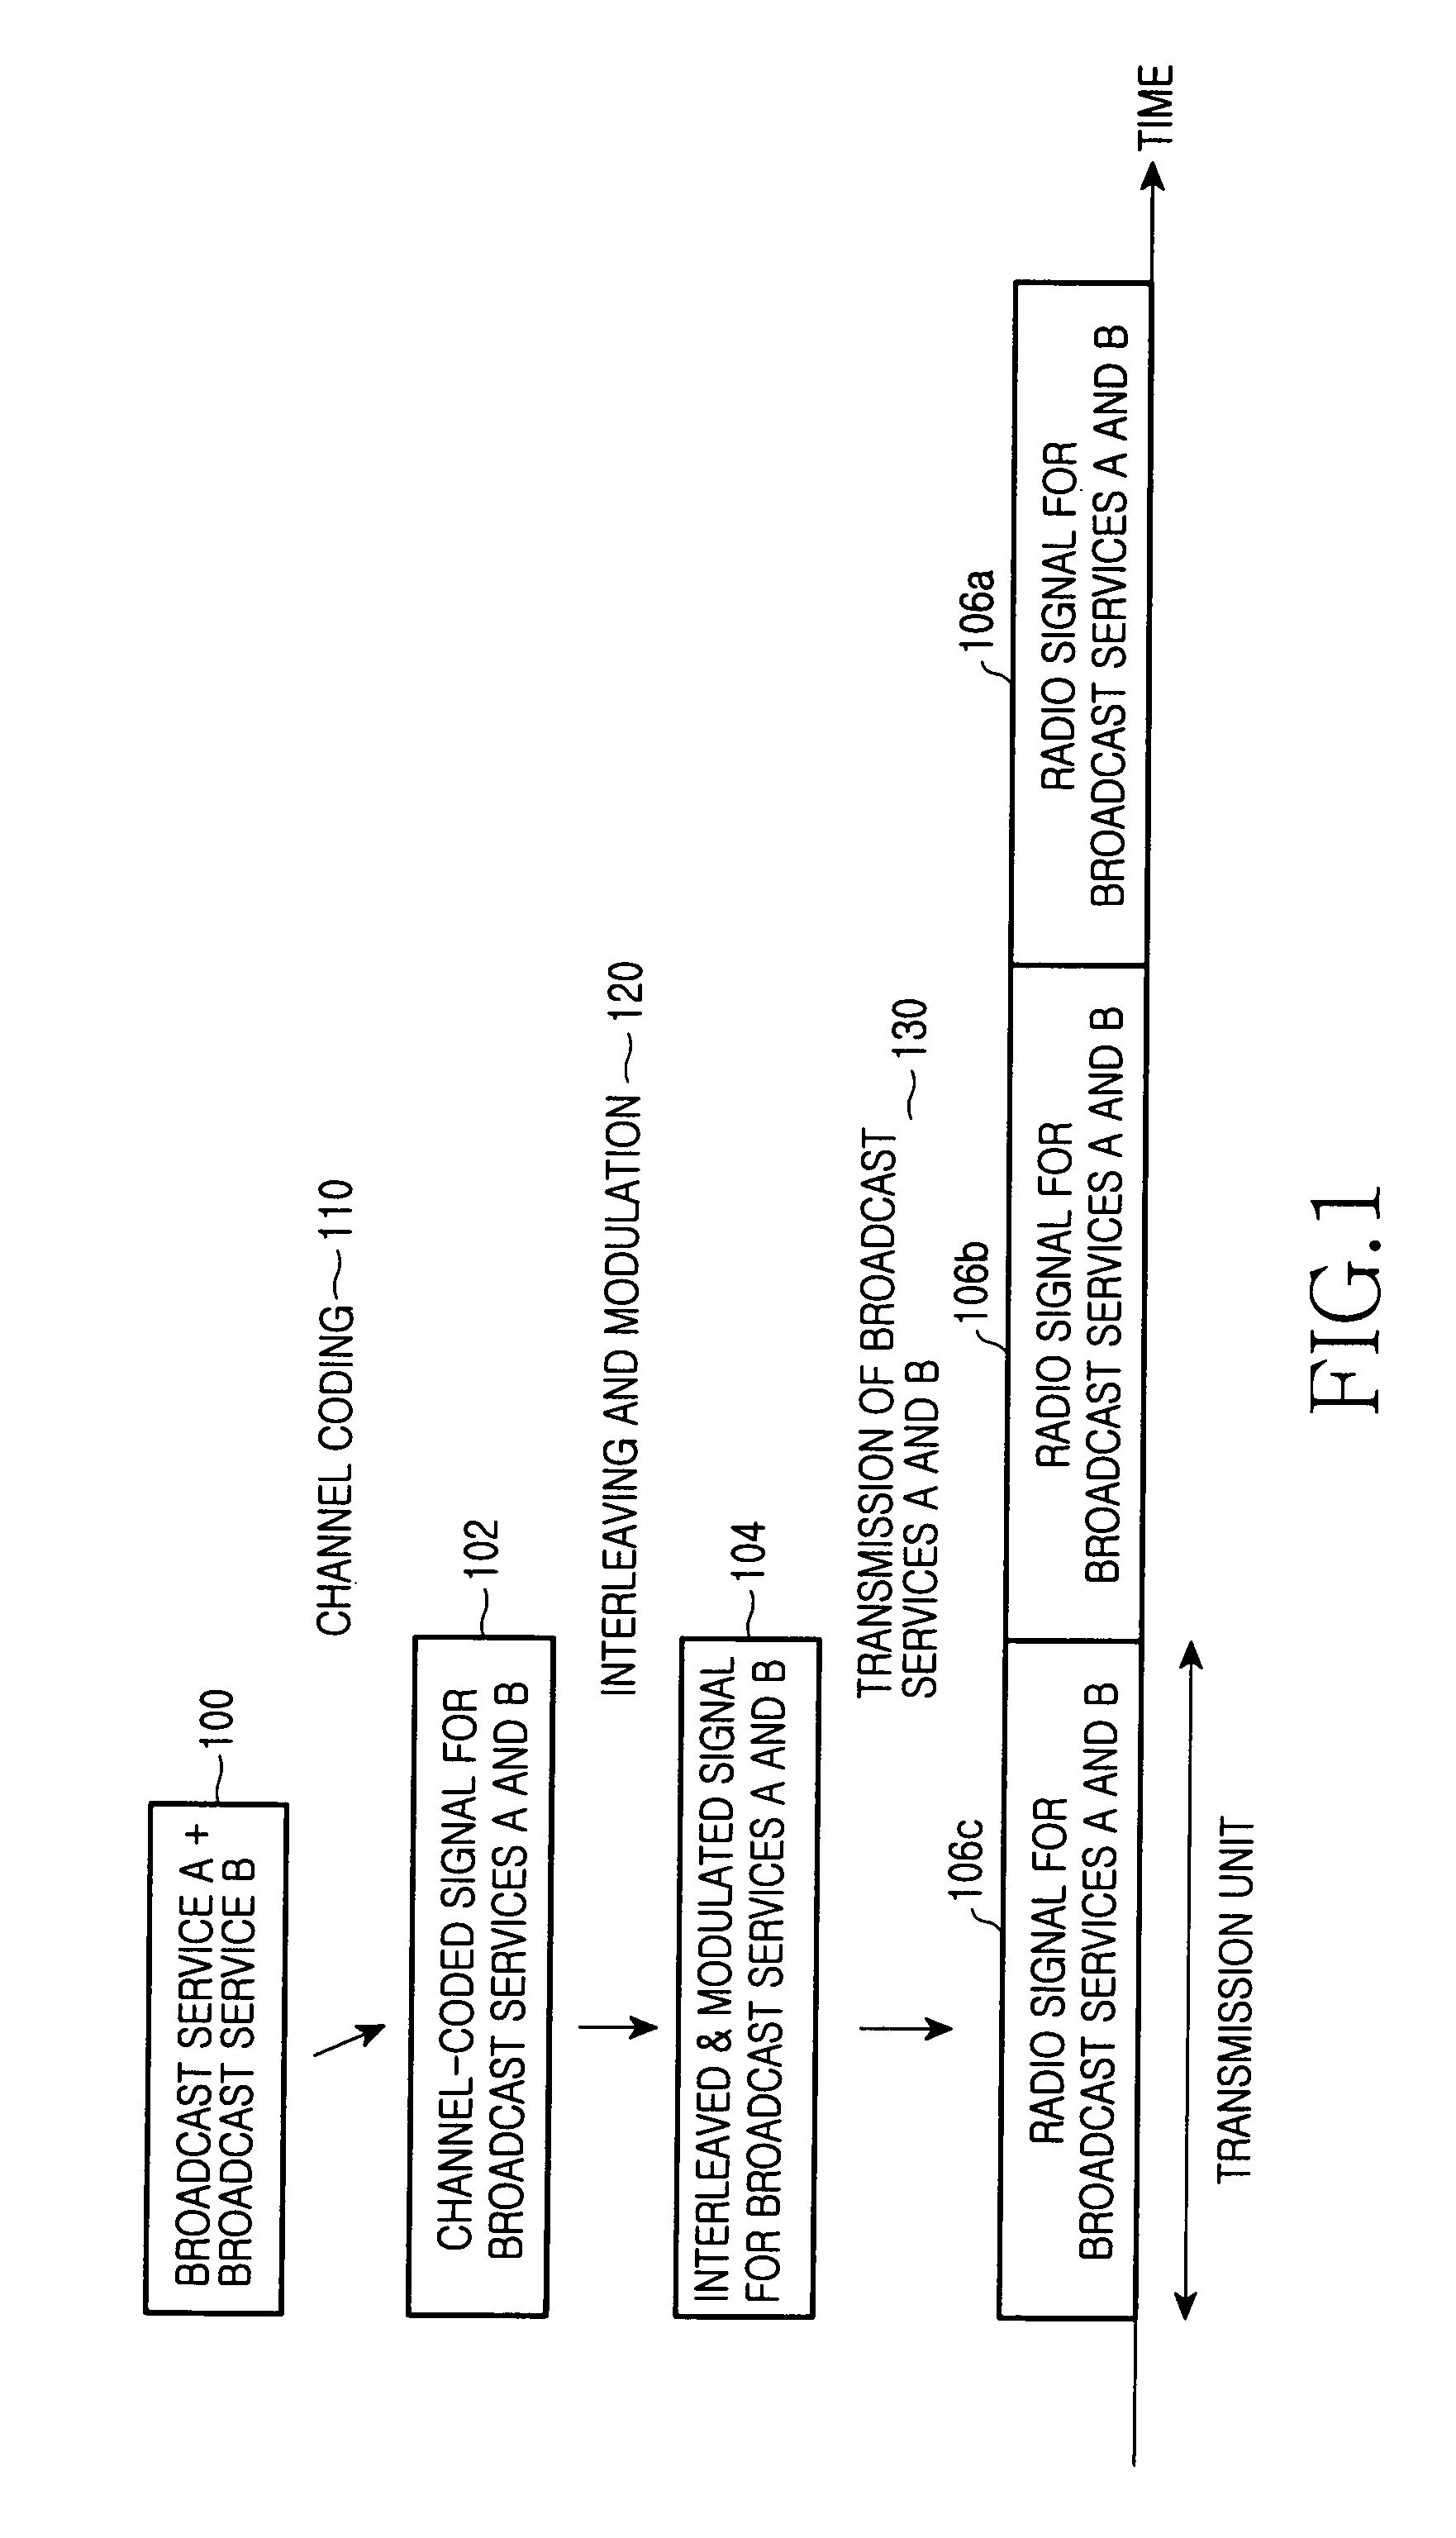 Method for transmitting and receiving broadcast service data in an OFDMA wireless communication system